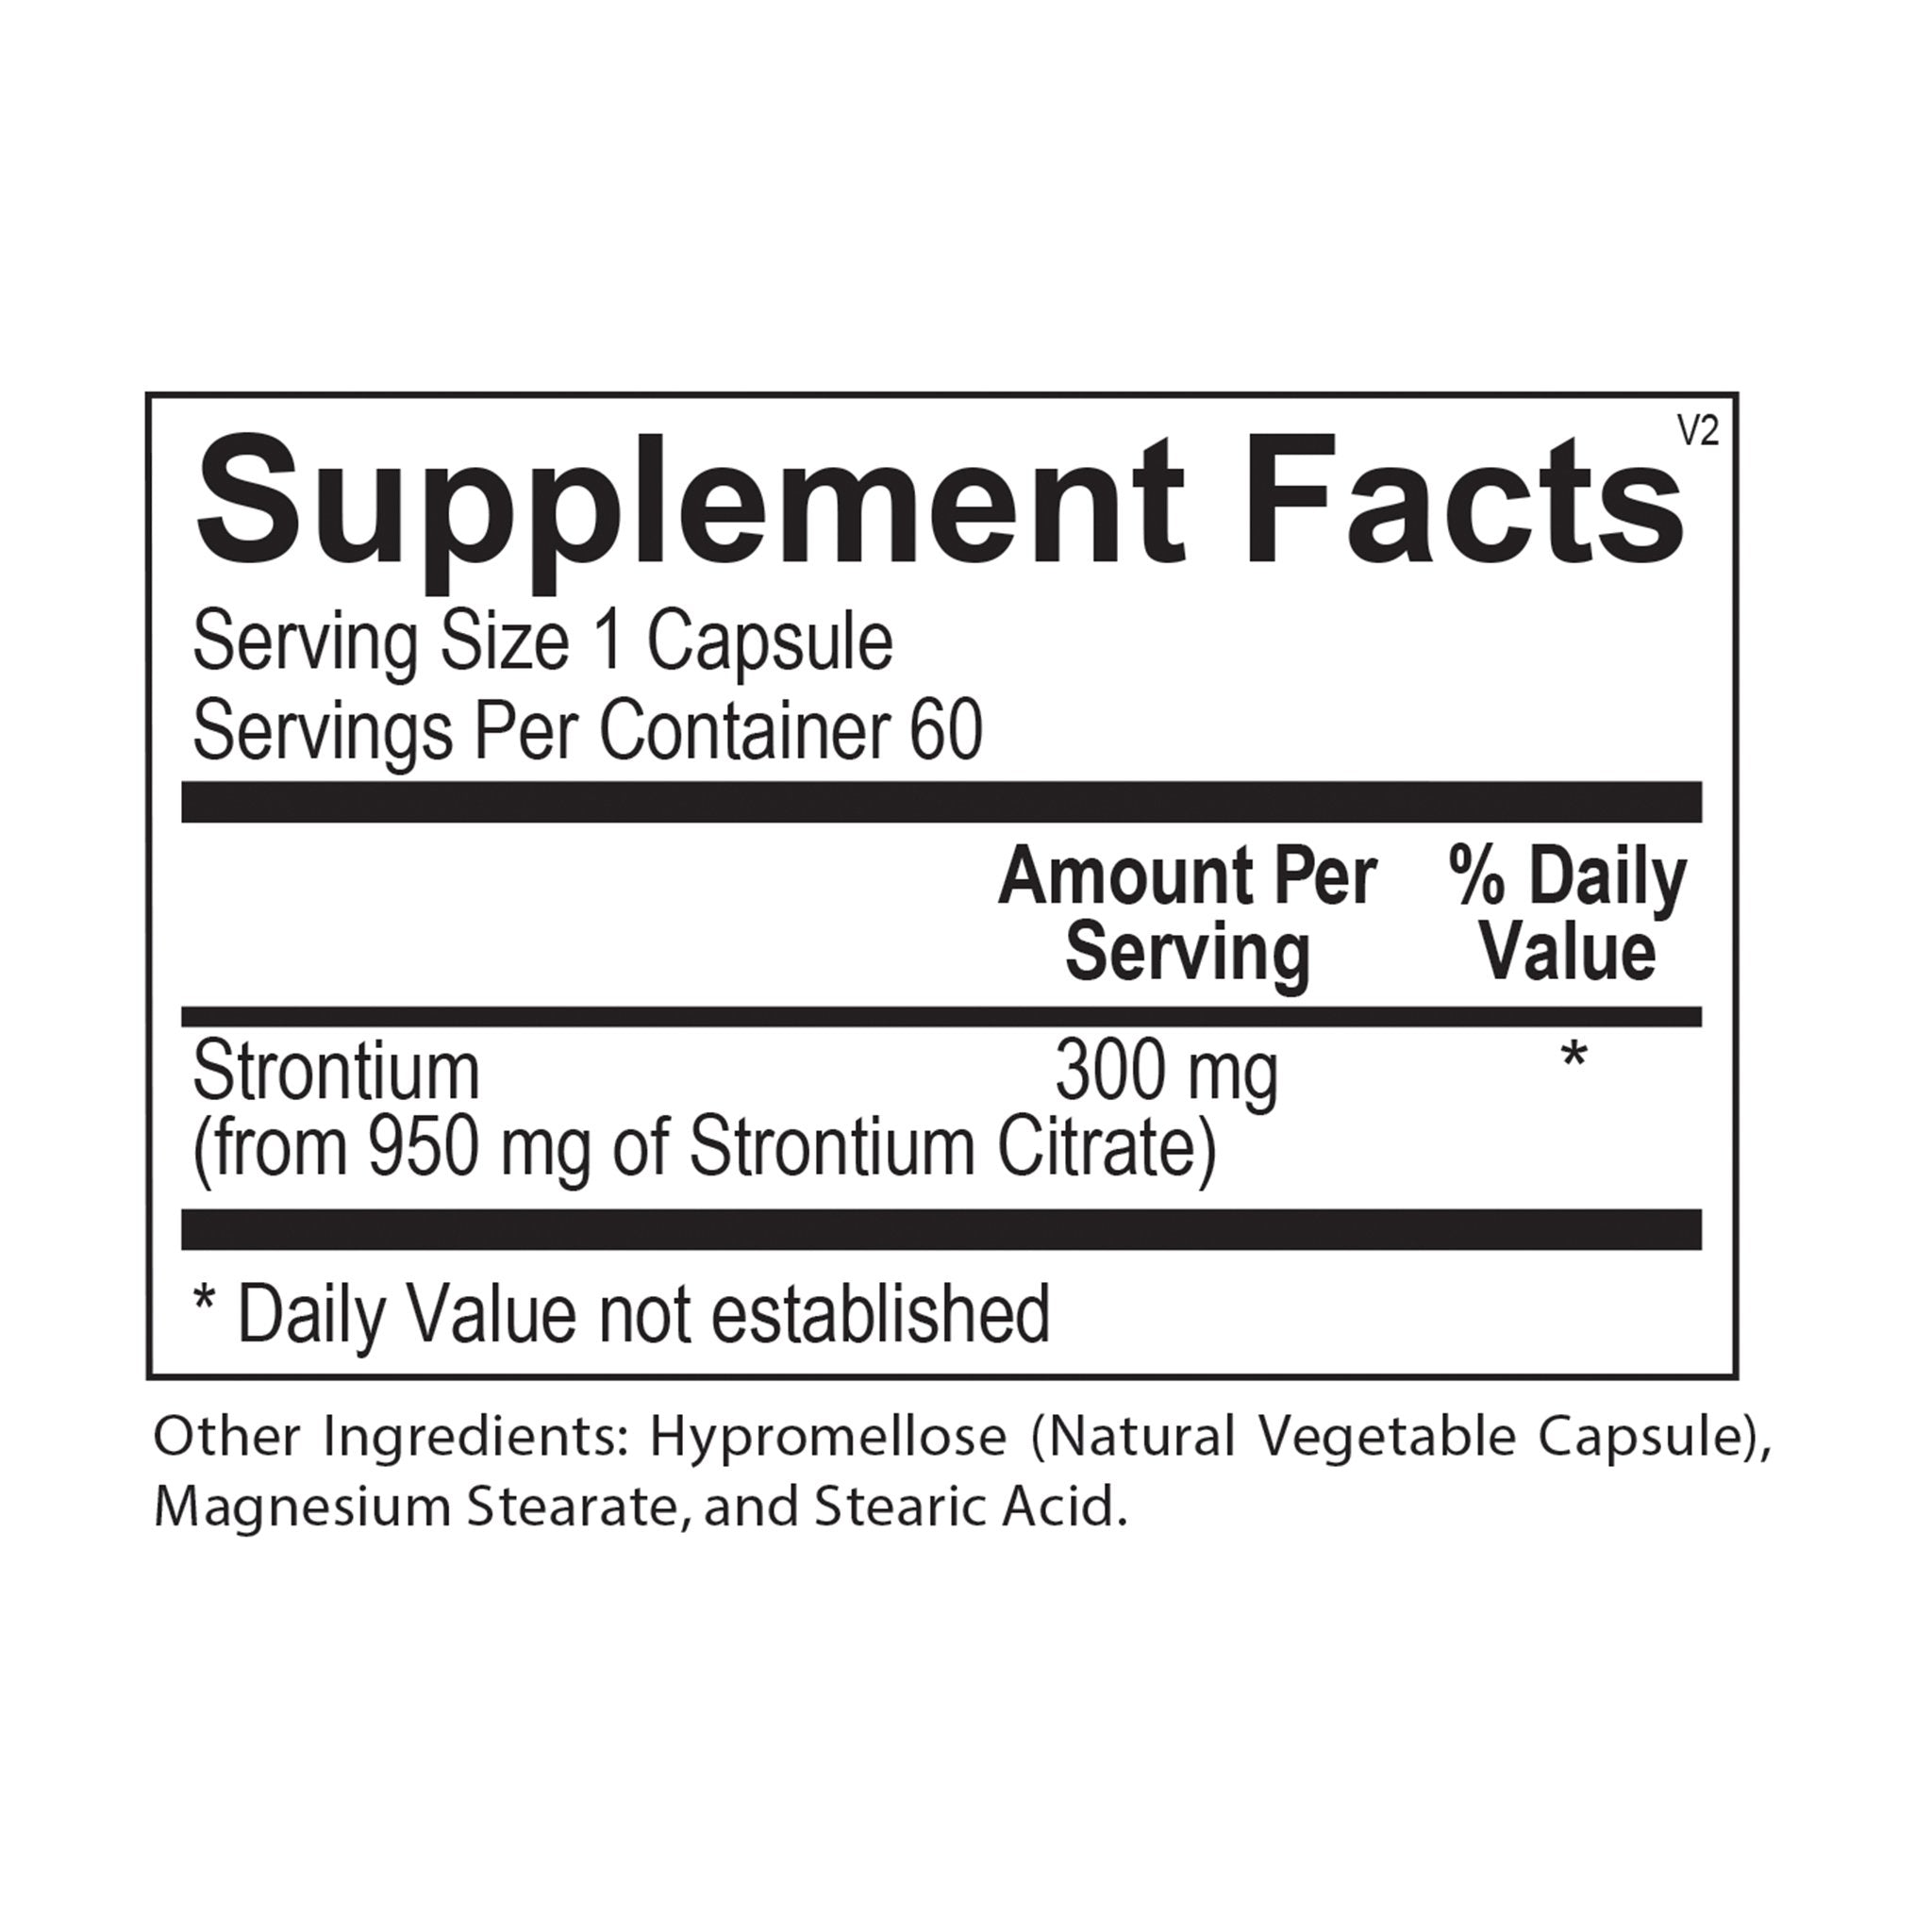 Supplement Facts for Strontium Wellness